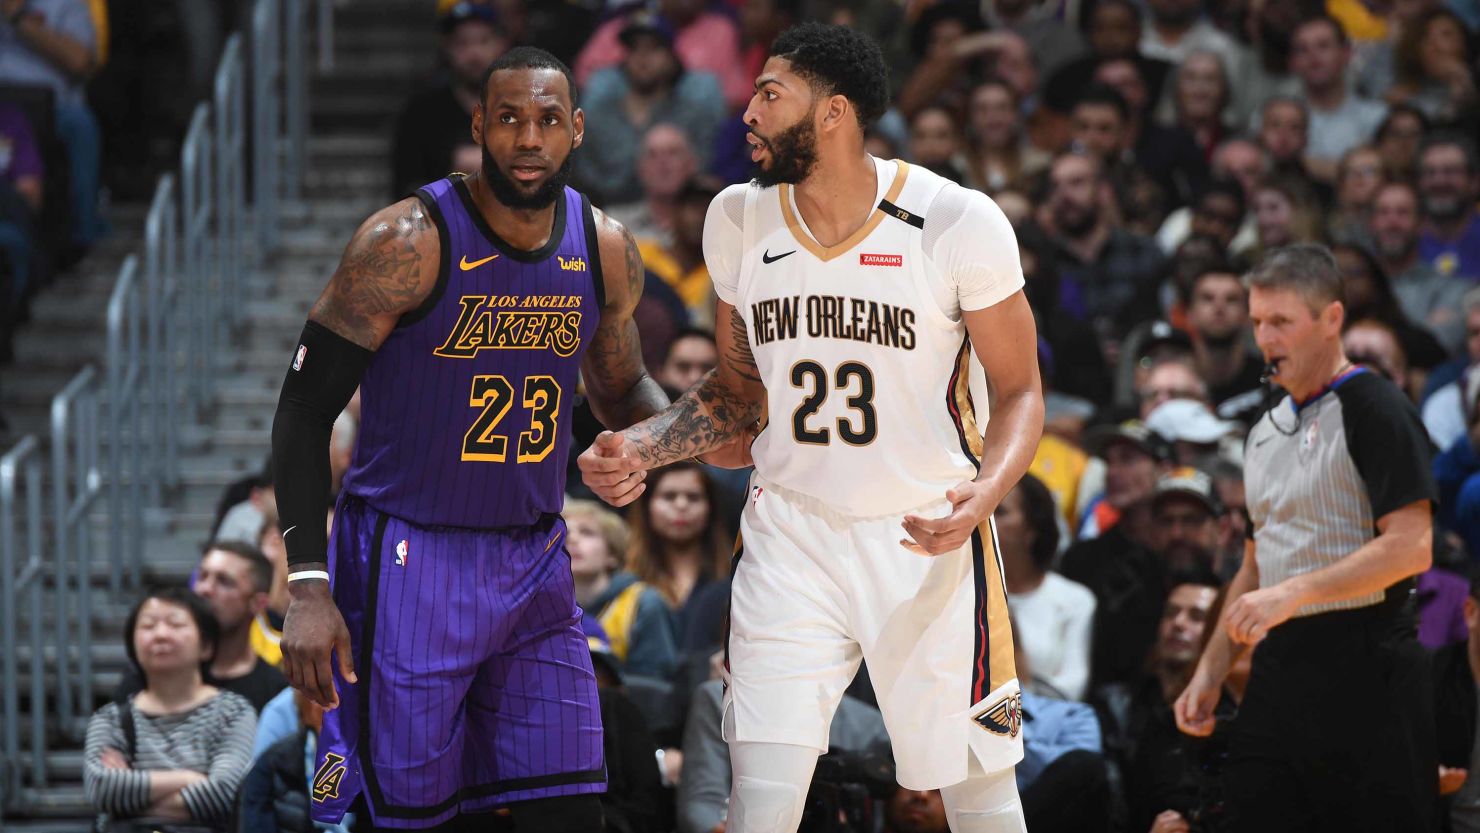 LeBron James #23 of the Los Angeles Lakers and Anthony Davis #23 of the New Orleans Pelicans fight for position during a game on December 21, 2018 at STAPLES Center in Los Angeles, California. 